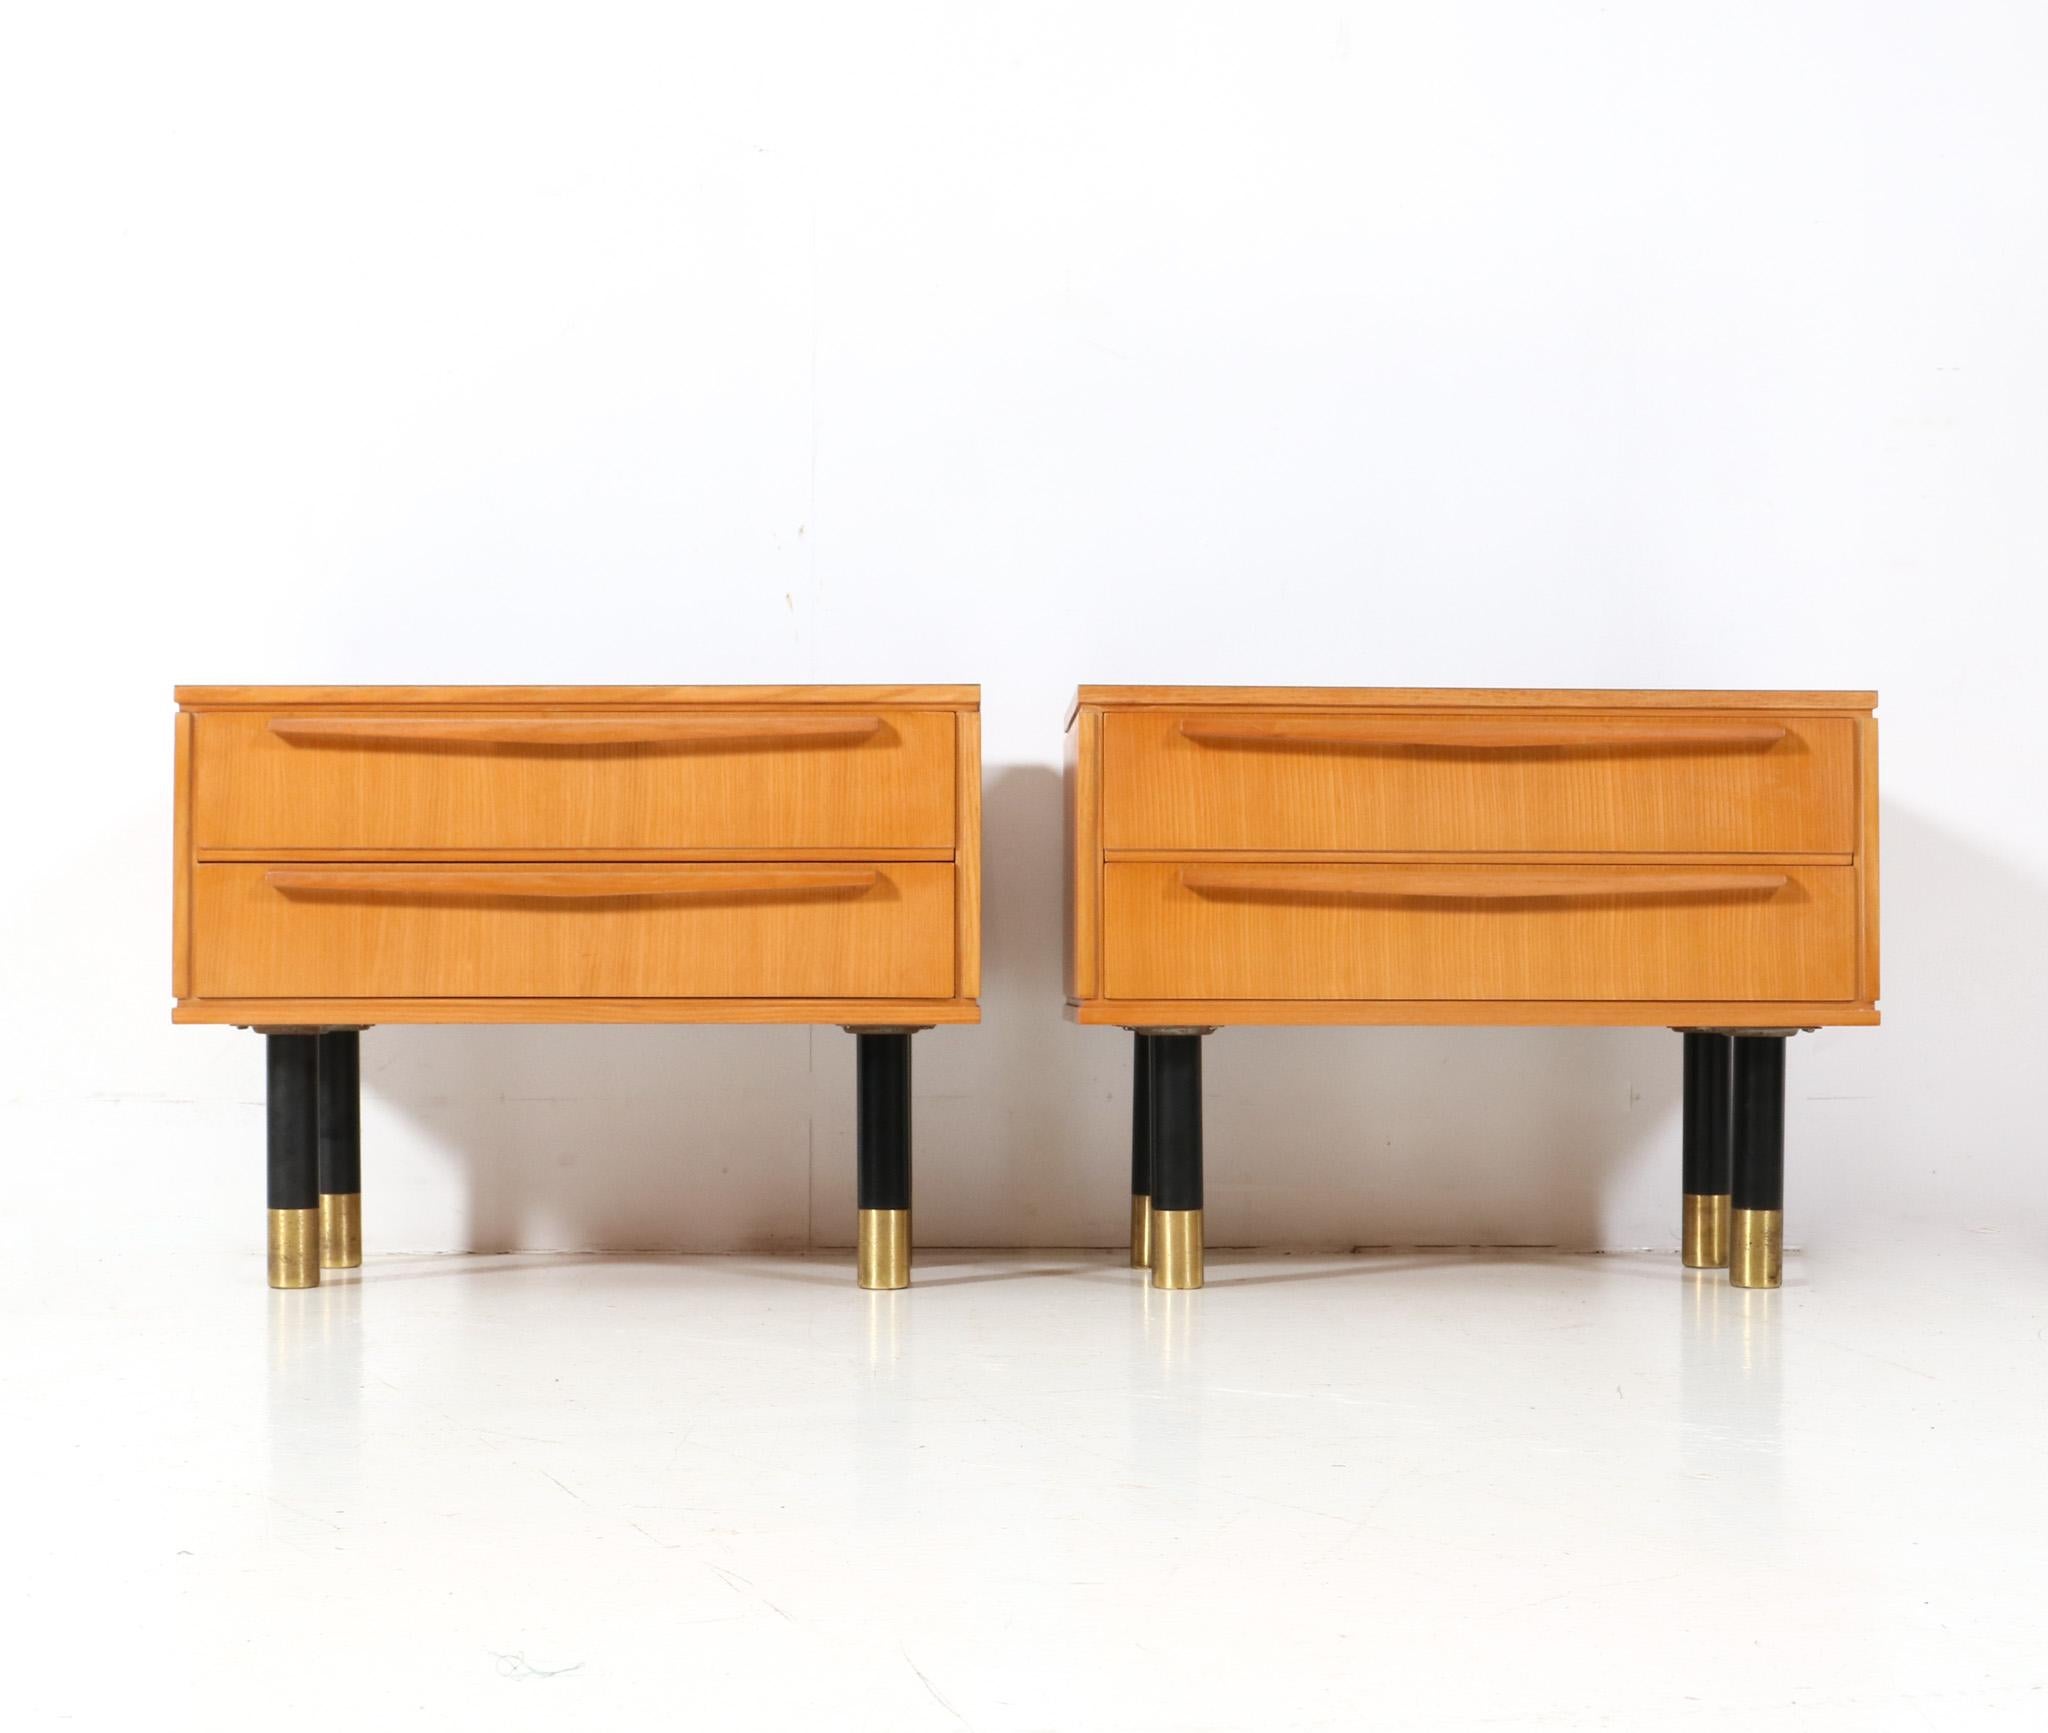 Stunning and elegant pair of Mid-Century Modern nightstands or bedside tables.
Striking Italian design from the 1950s.
Solid ash and ash veneered bases with original black lacquered tops and legs on brass feet.
This wonderful pair of Mid-Century